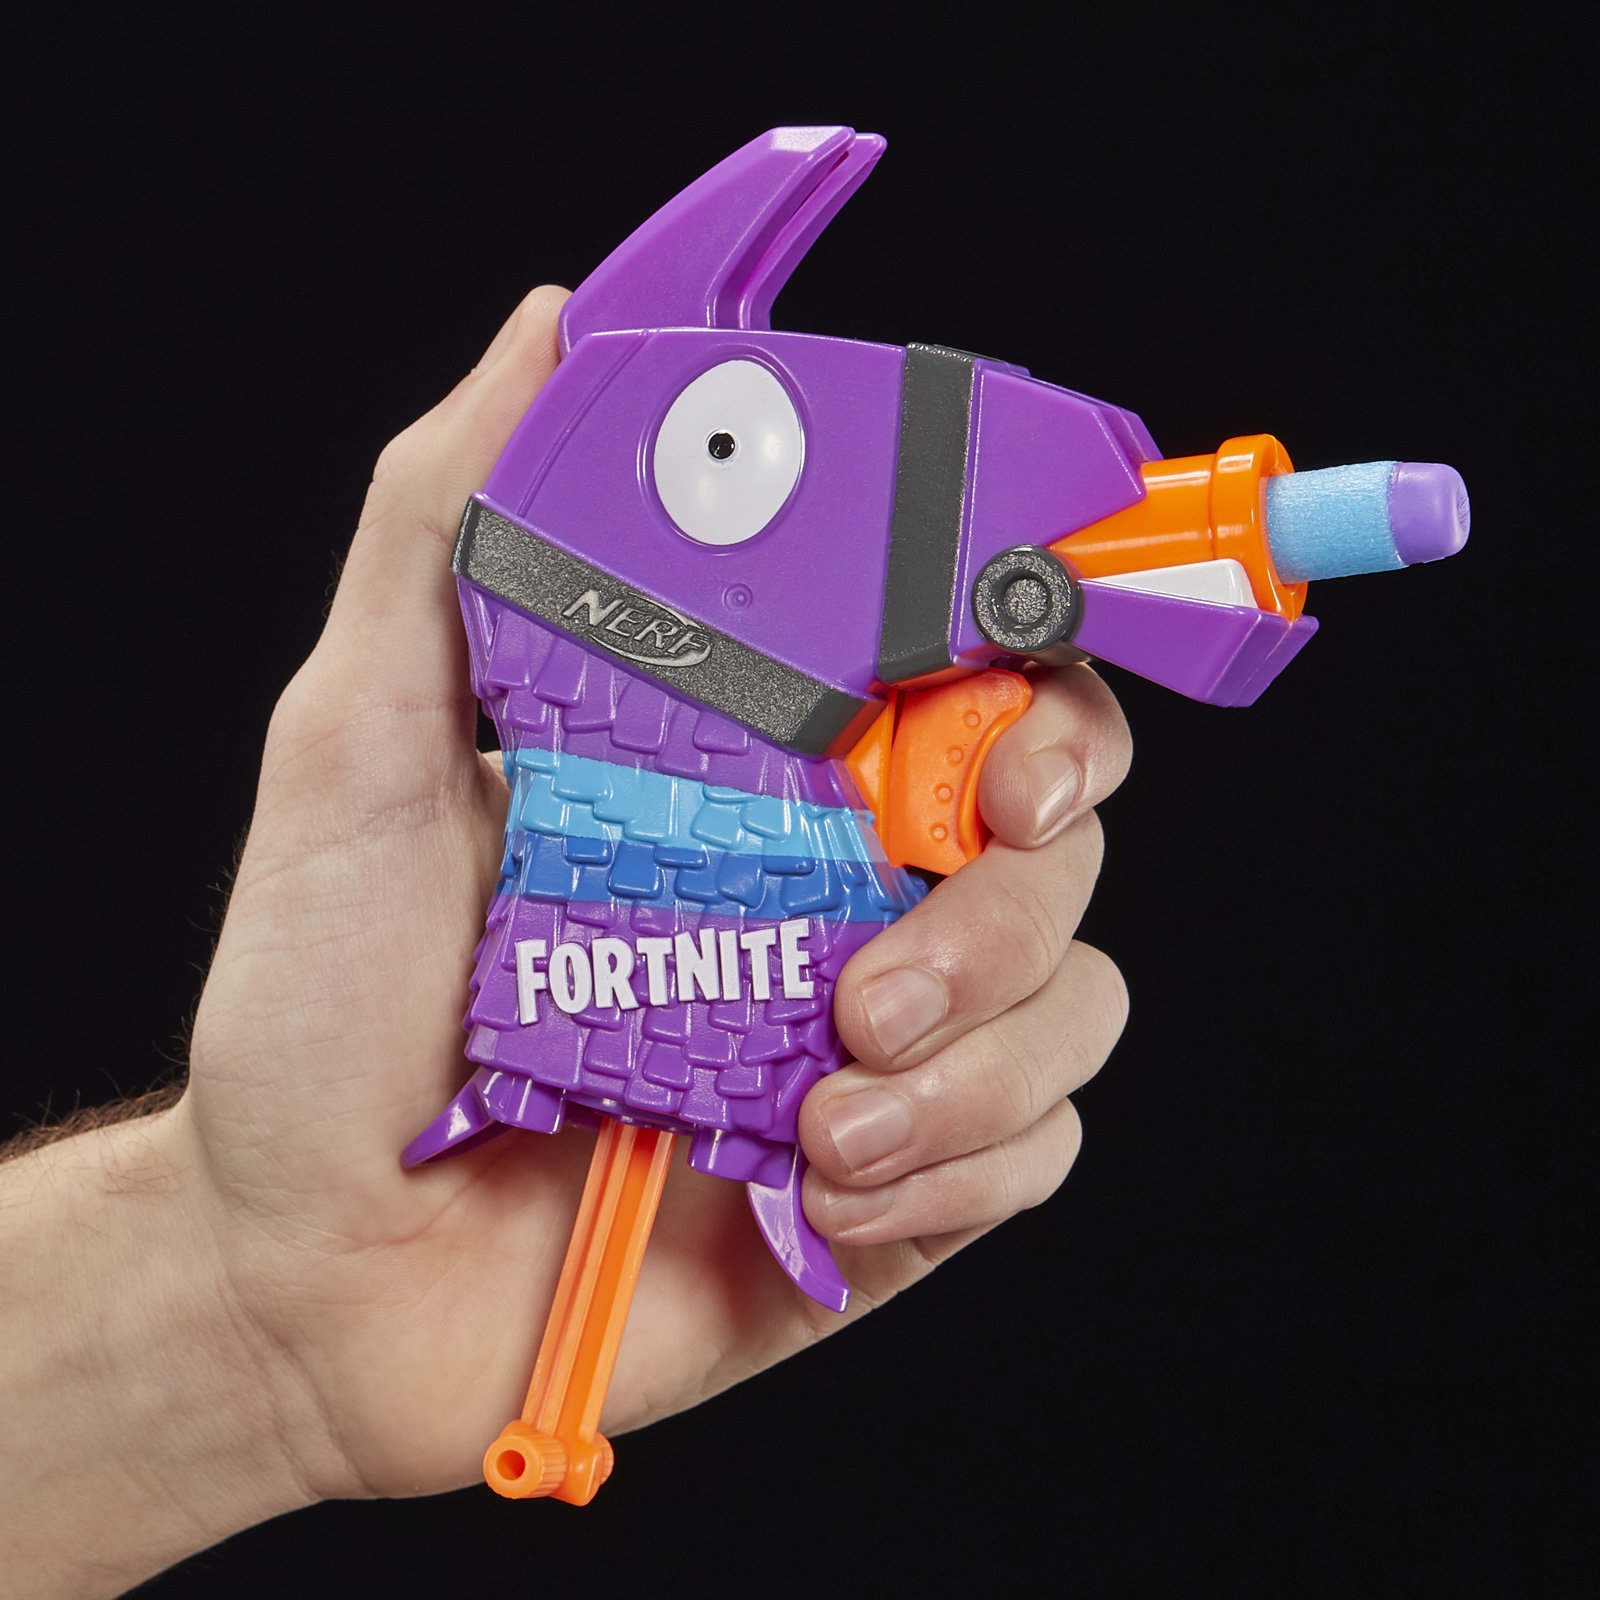 Nerf's 'Fortnite' guns will be here March 22nd | DeviceDaily.com